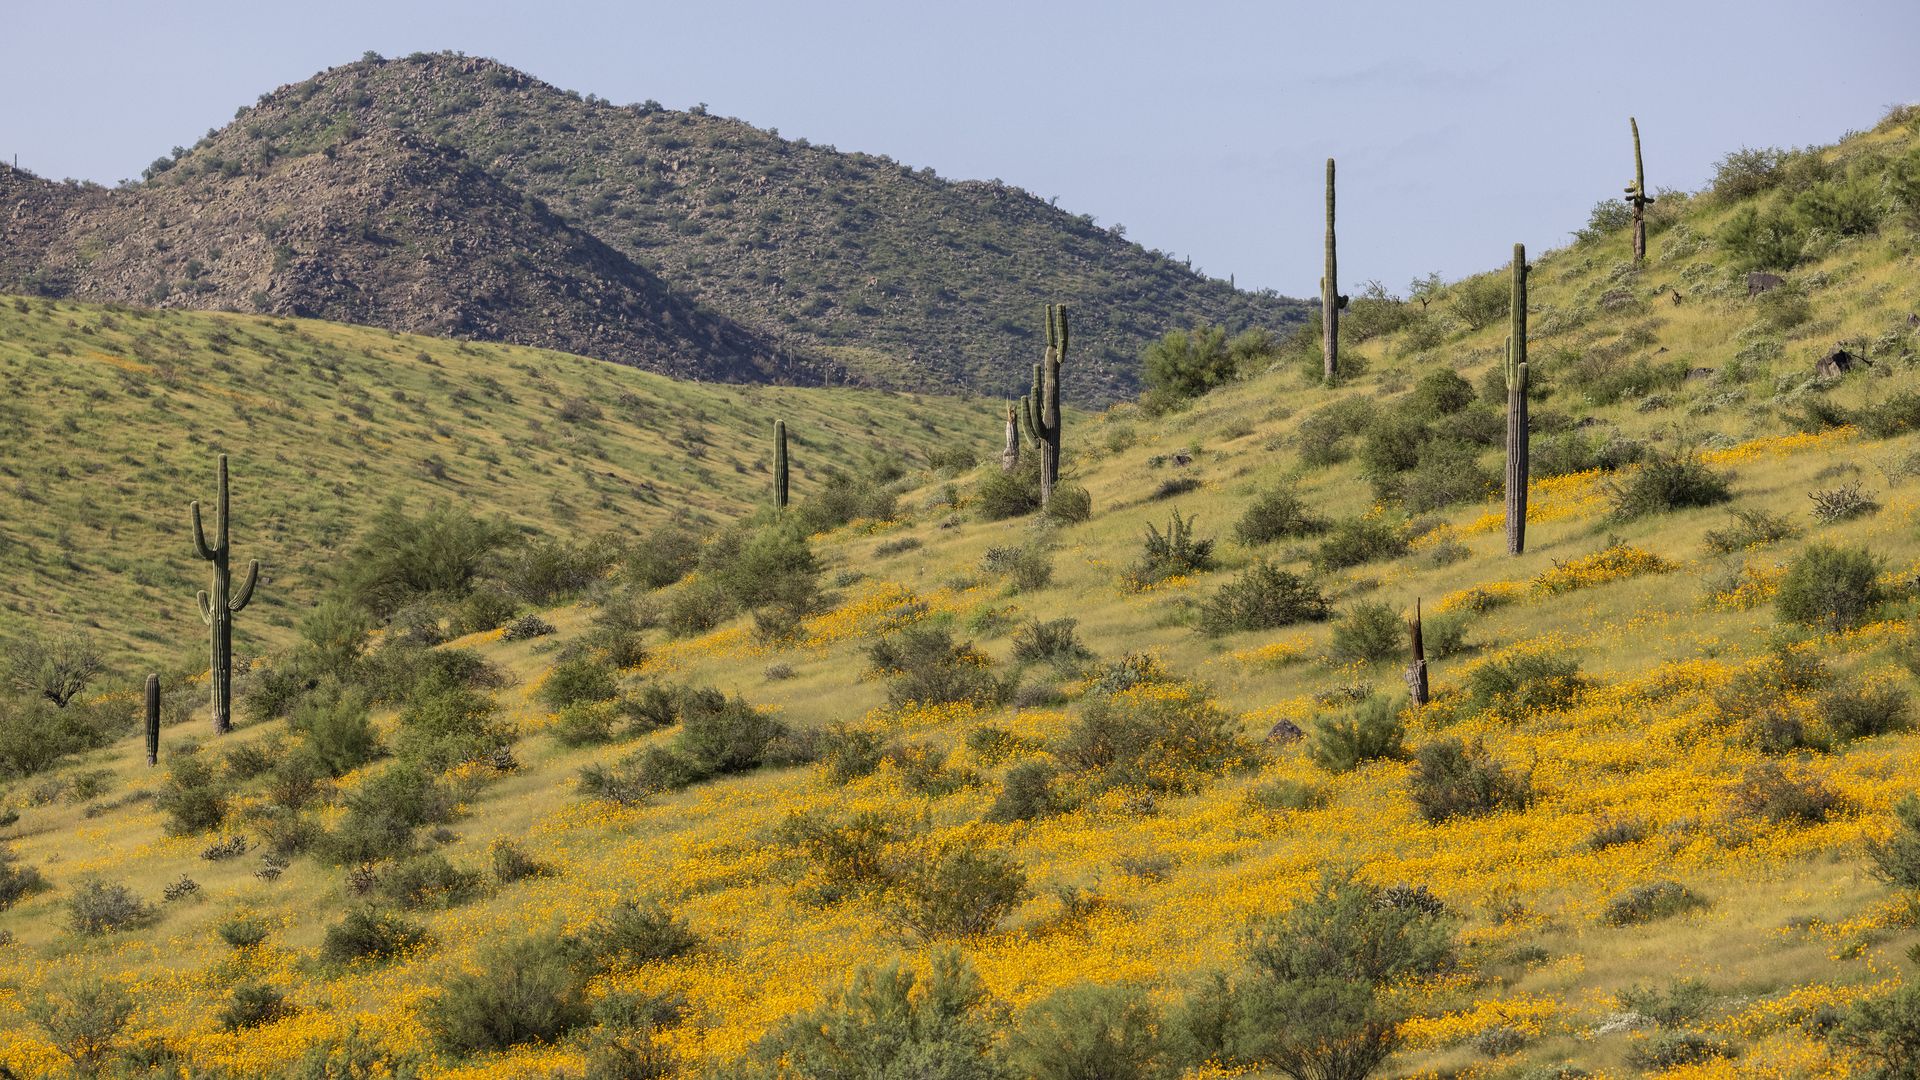 Yellow wild flowers and saguaro cactus on a mountainside.